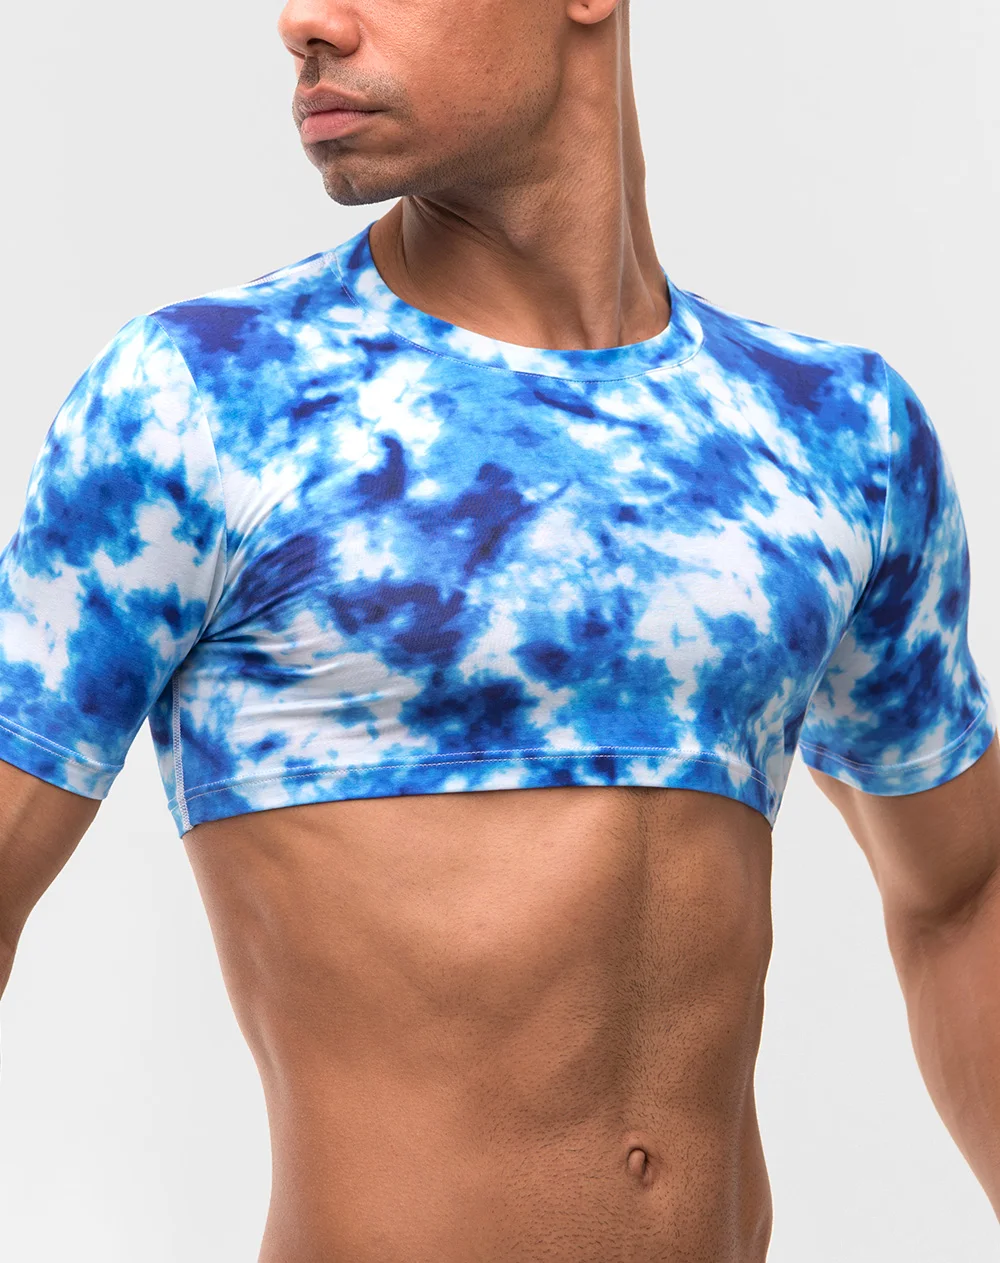 

2022 Our must-have Tie Dye Crop Tops are made from a premium breathable cotton-spandex blend t shirt men